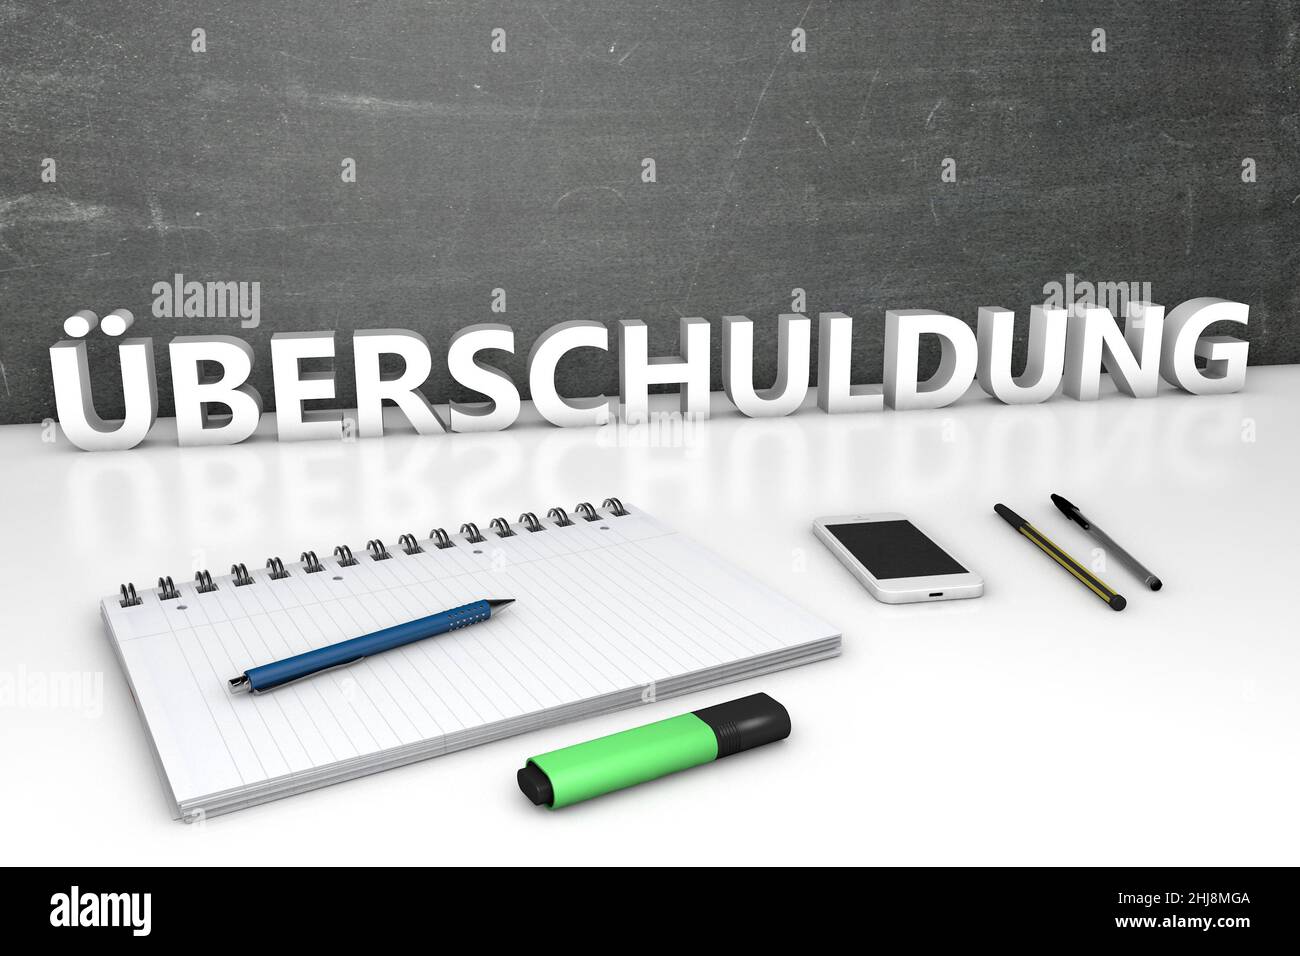 Ueberschuldung - german word for over indebtedness  - text concept with chalkboard, notebook, pens and mobile phone. 3D render illustration. Stock Photo